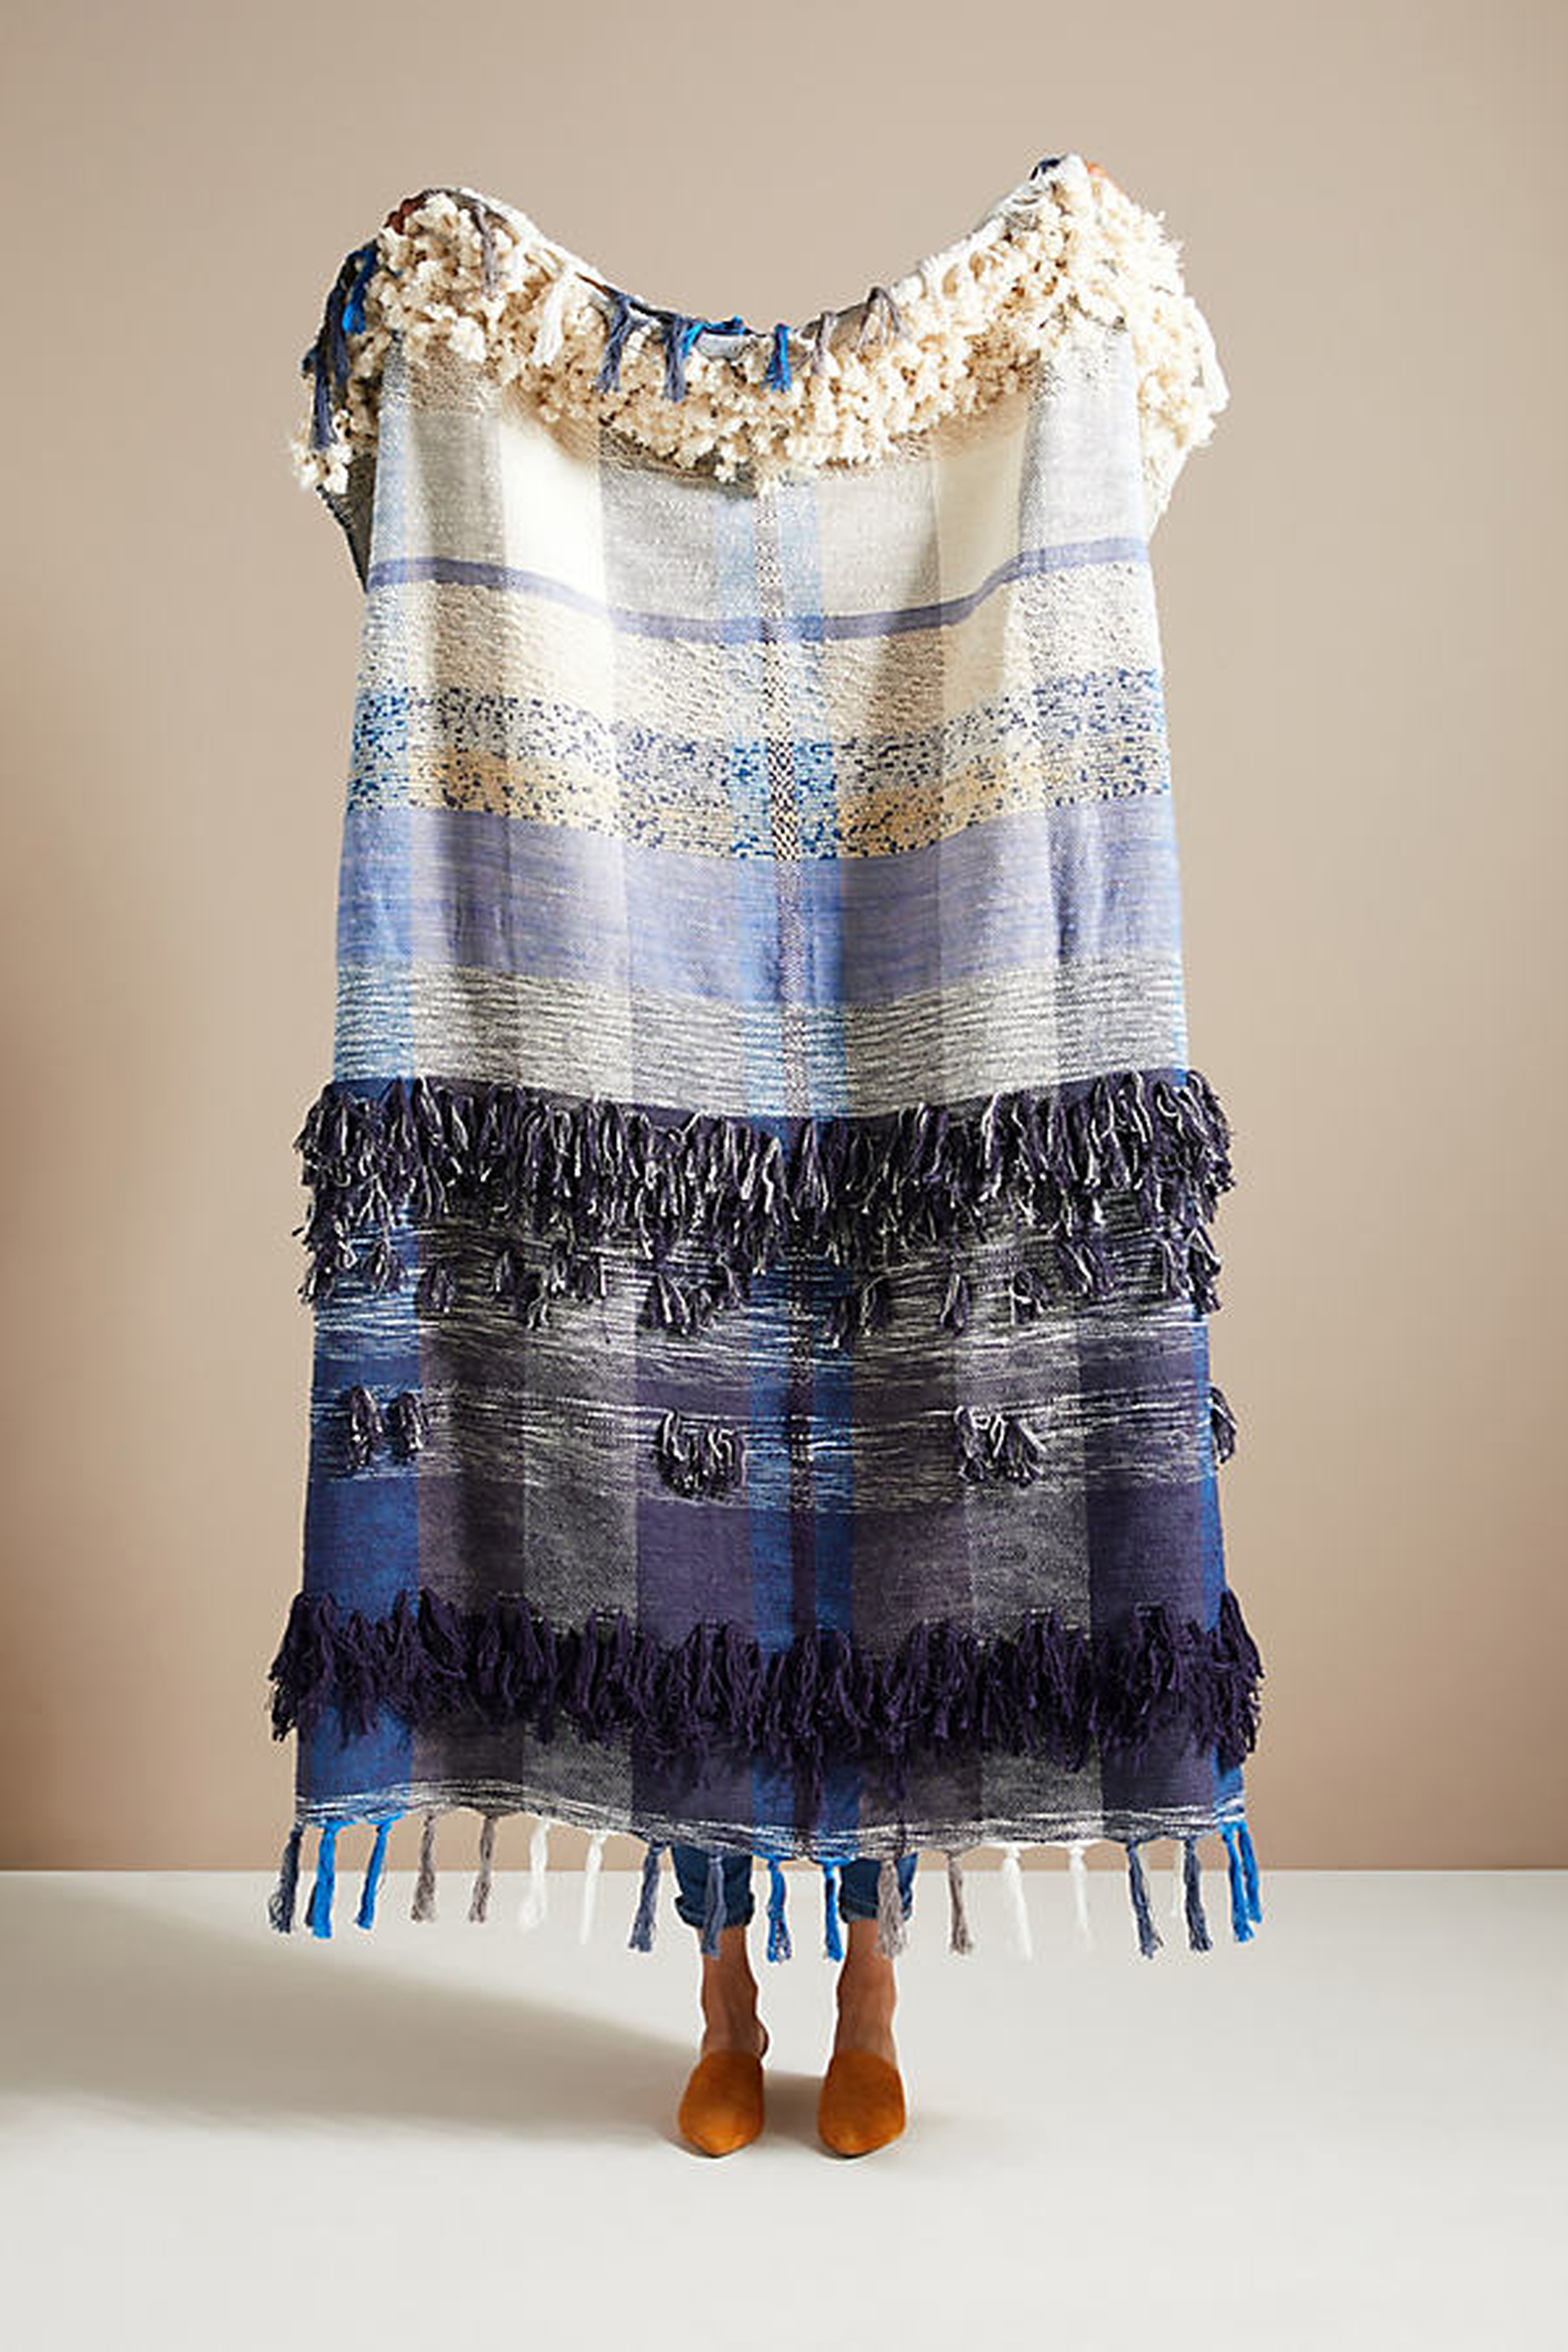 All Roads Bloomfield Throw Blanket By All Roads Design in Blue - Anthropologie